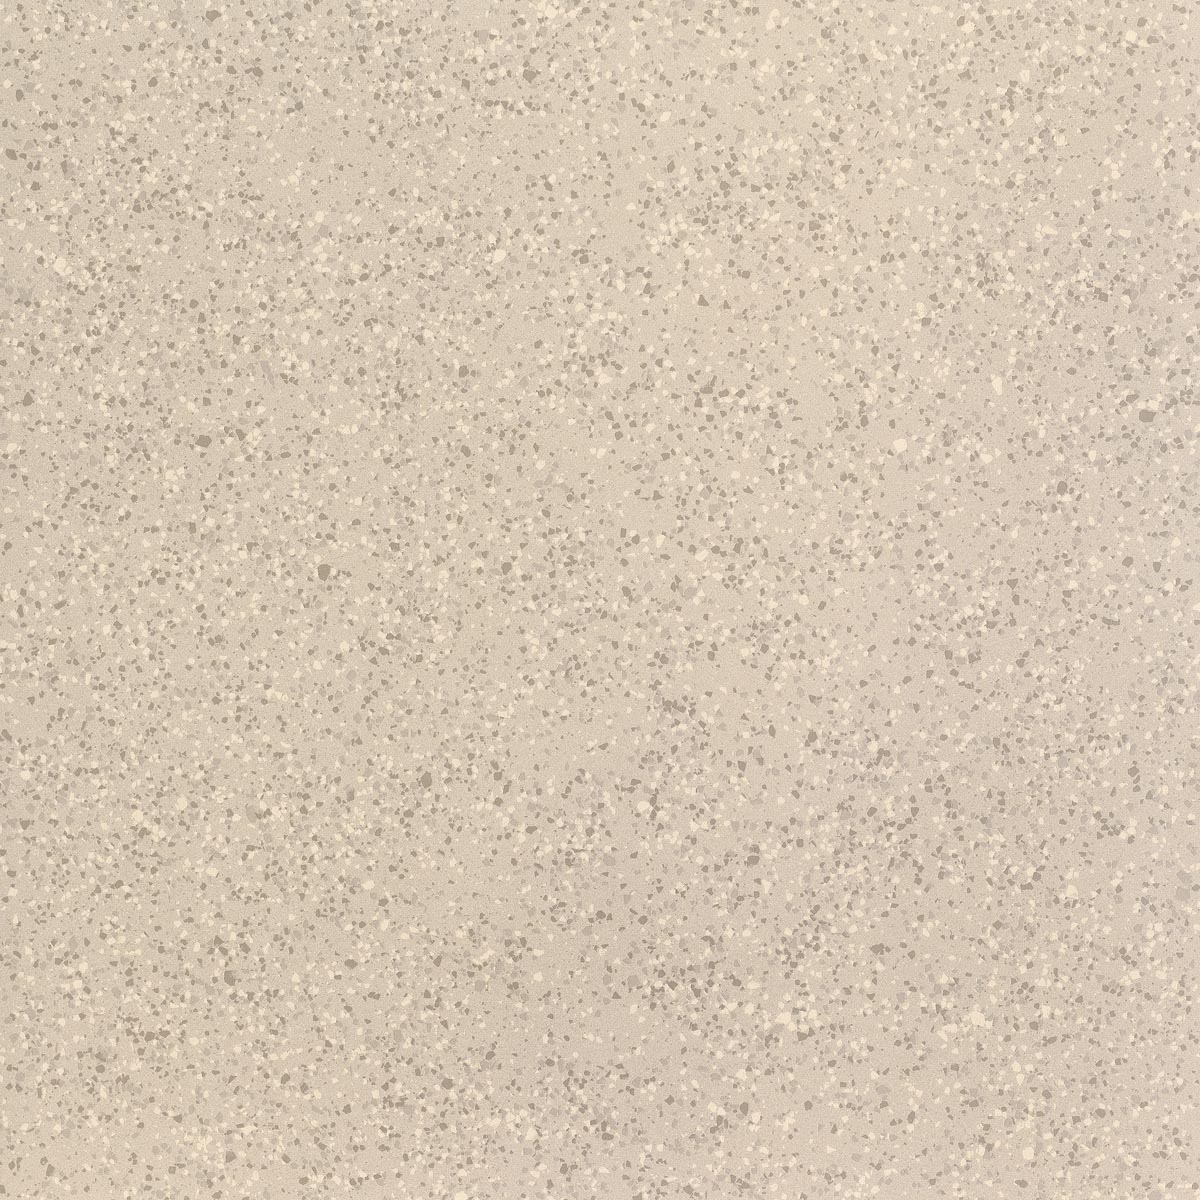 Imola Parade Almond Natural Flat Matt Outdoor 166103 120x120cm rectified 10,5mm - PRDE RB120A RM